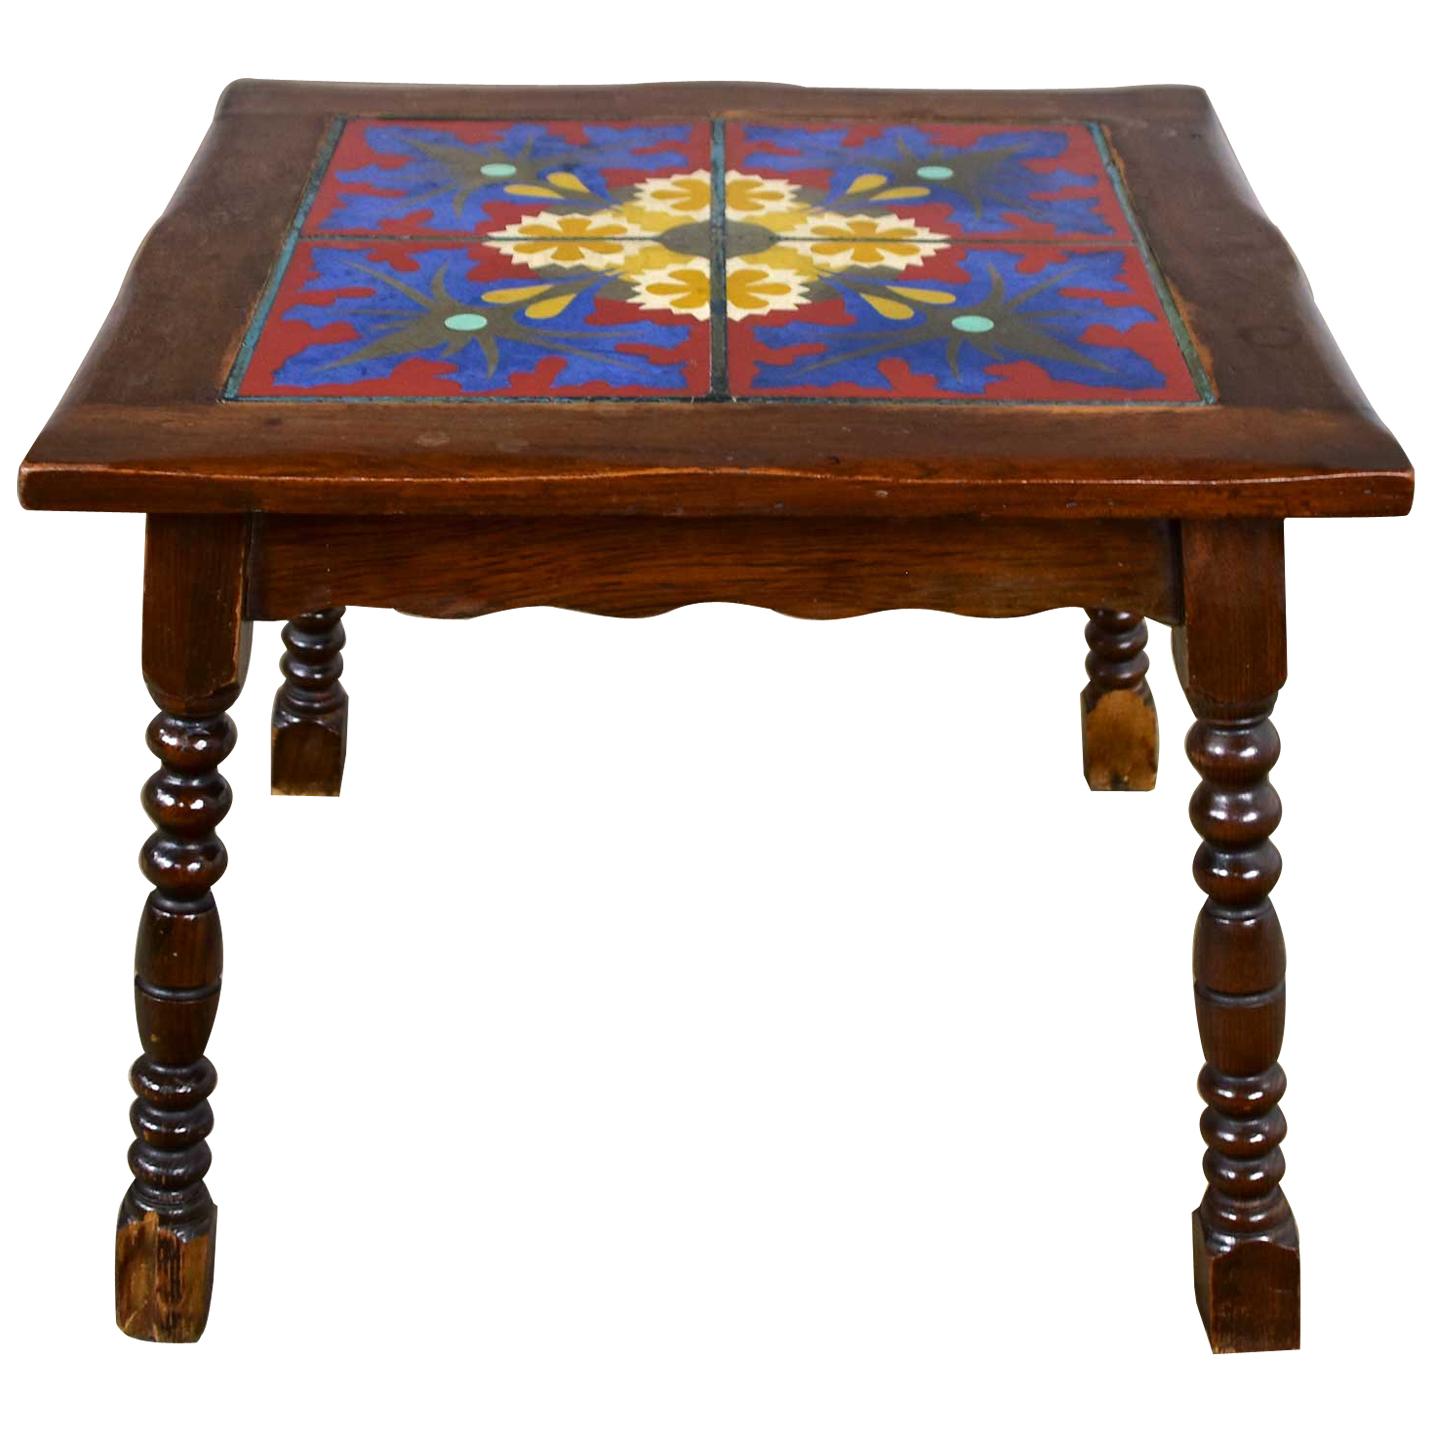 Table d'appoint Catalina California ou Mission Arts & Craft Style Spanish Tile Top en vente